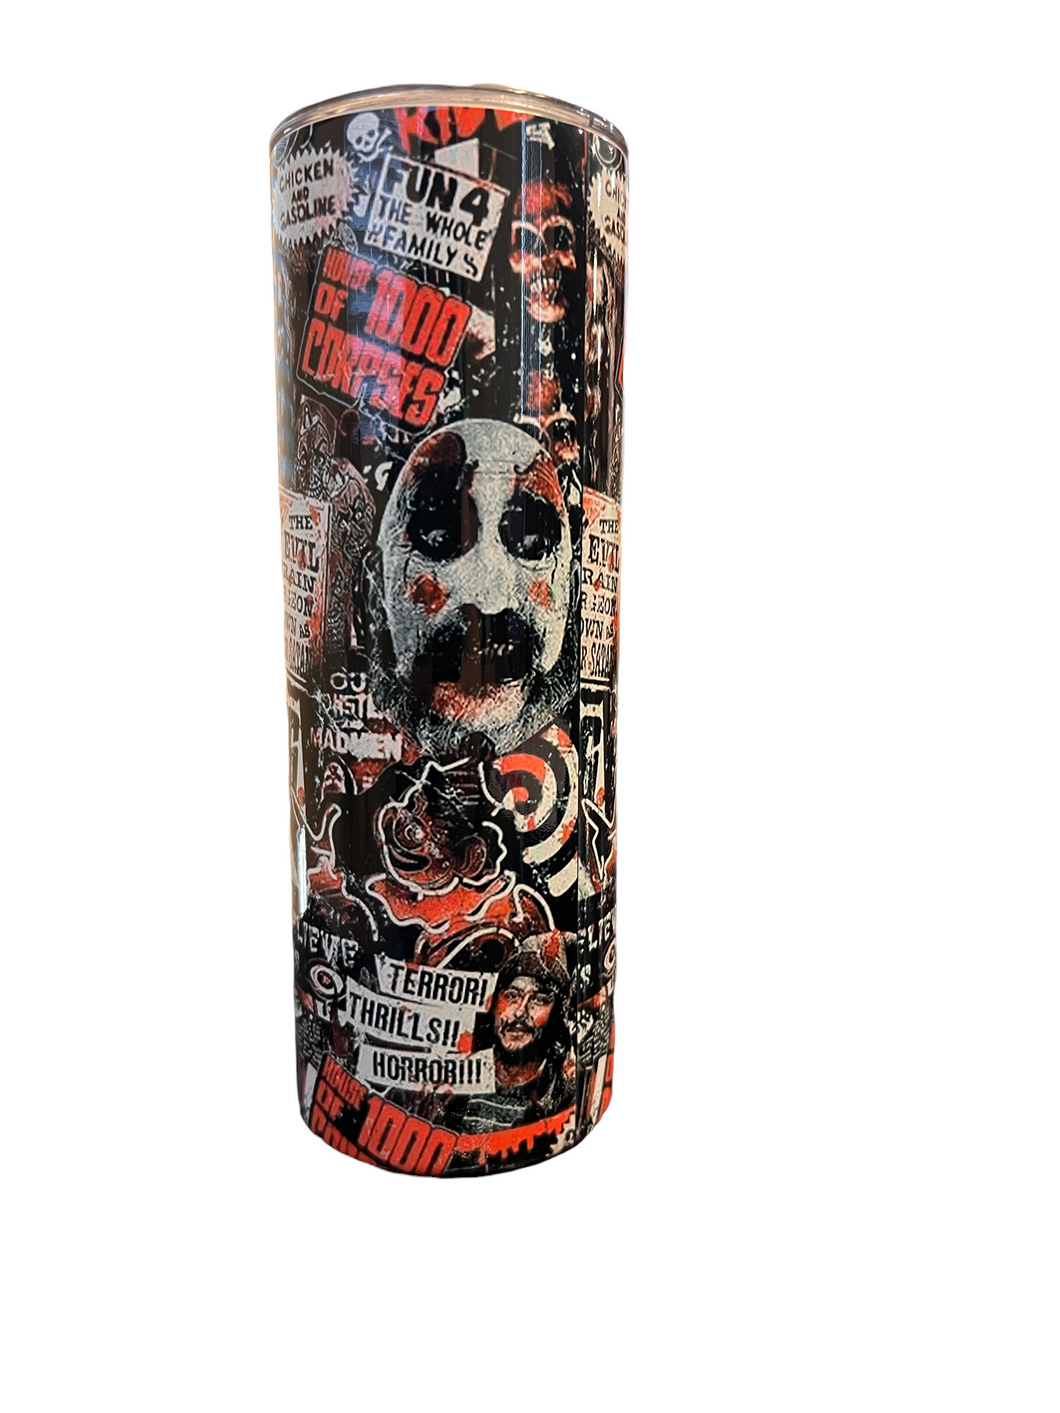 House of 1000 Corpses tumbler